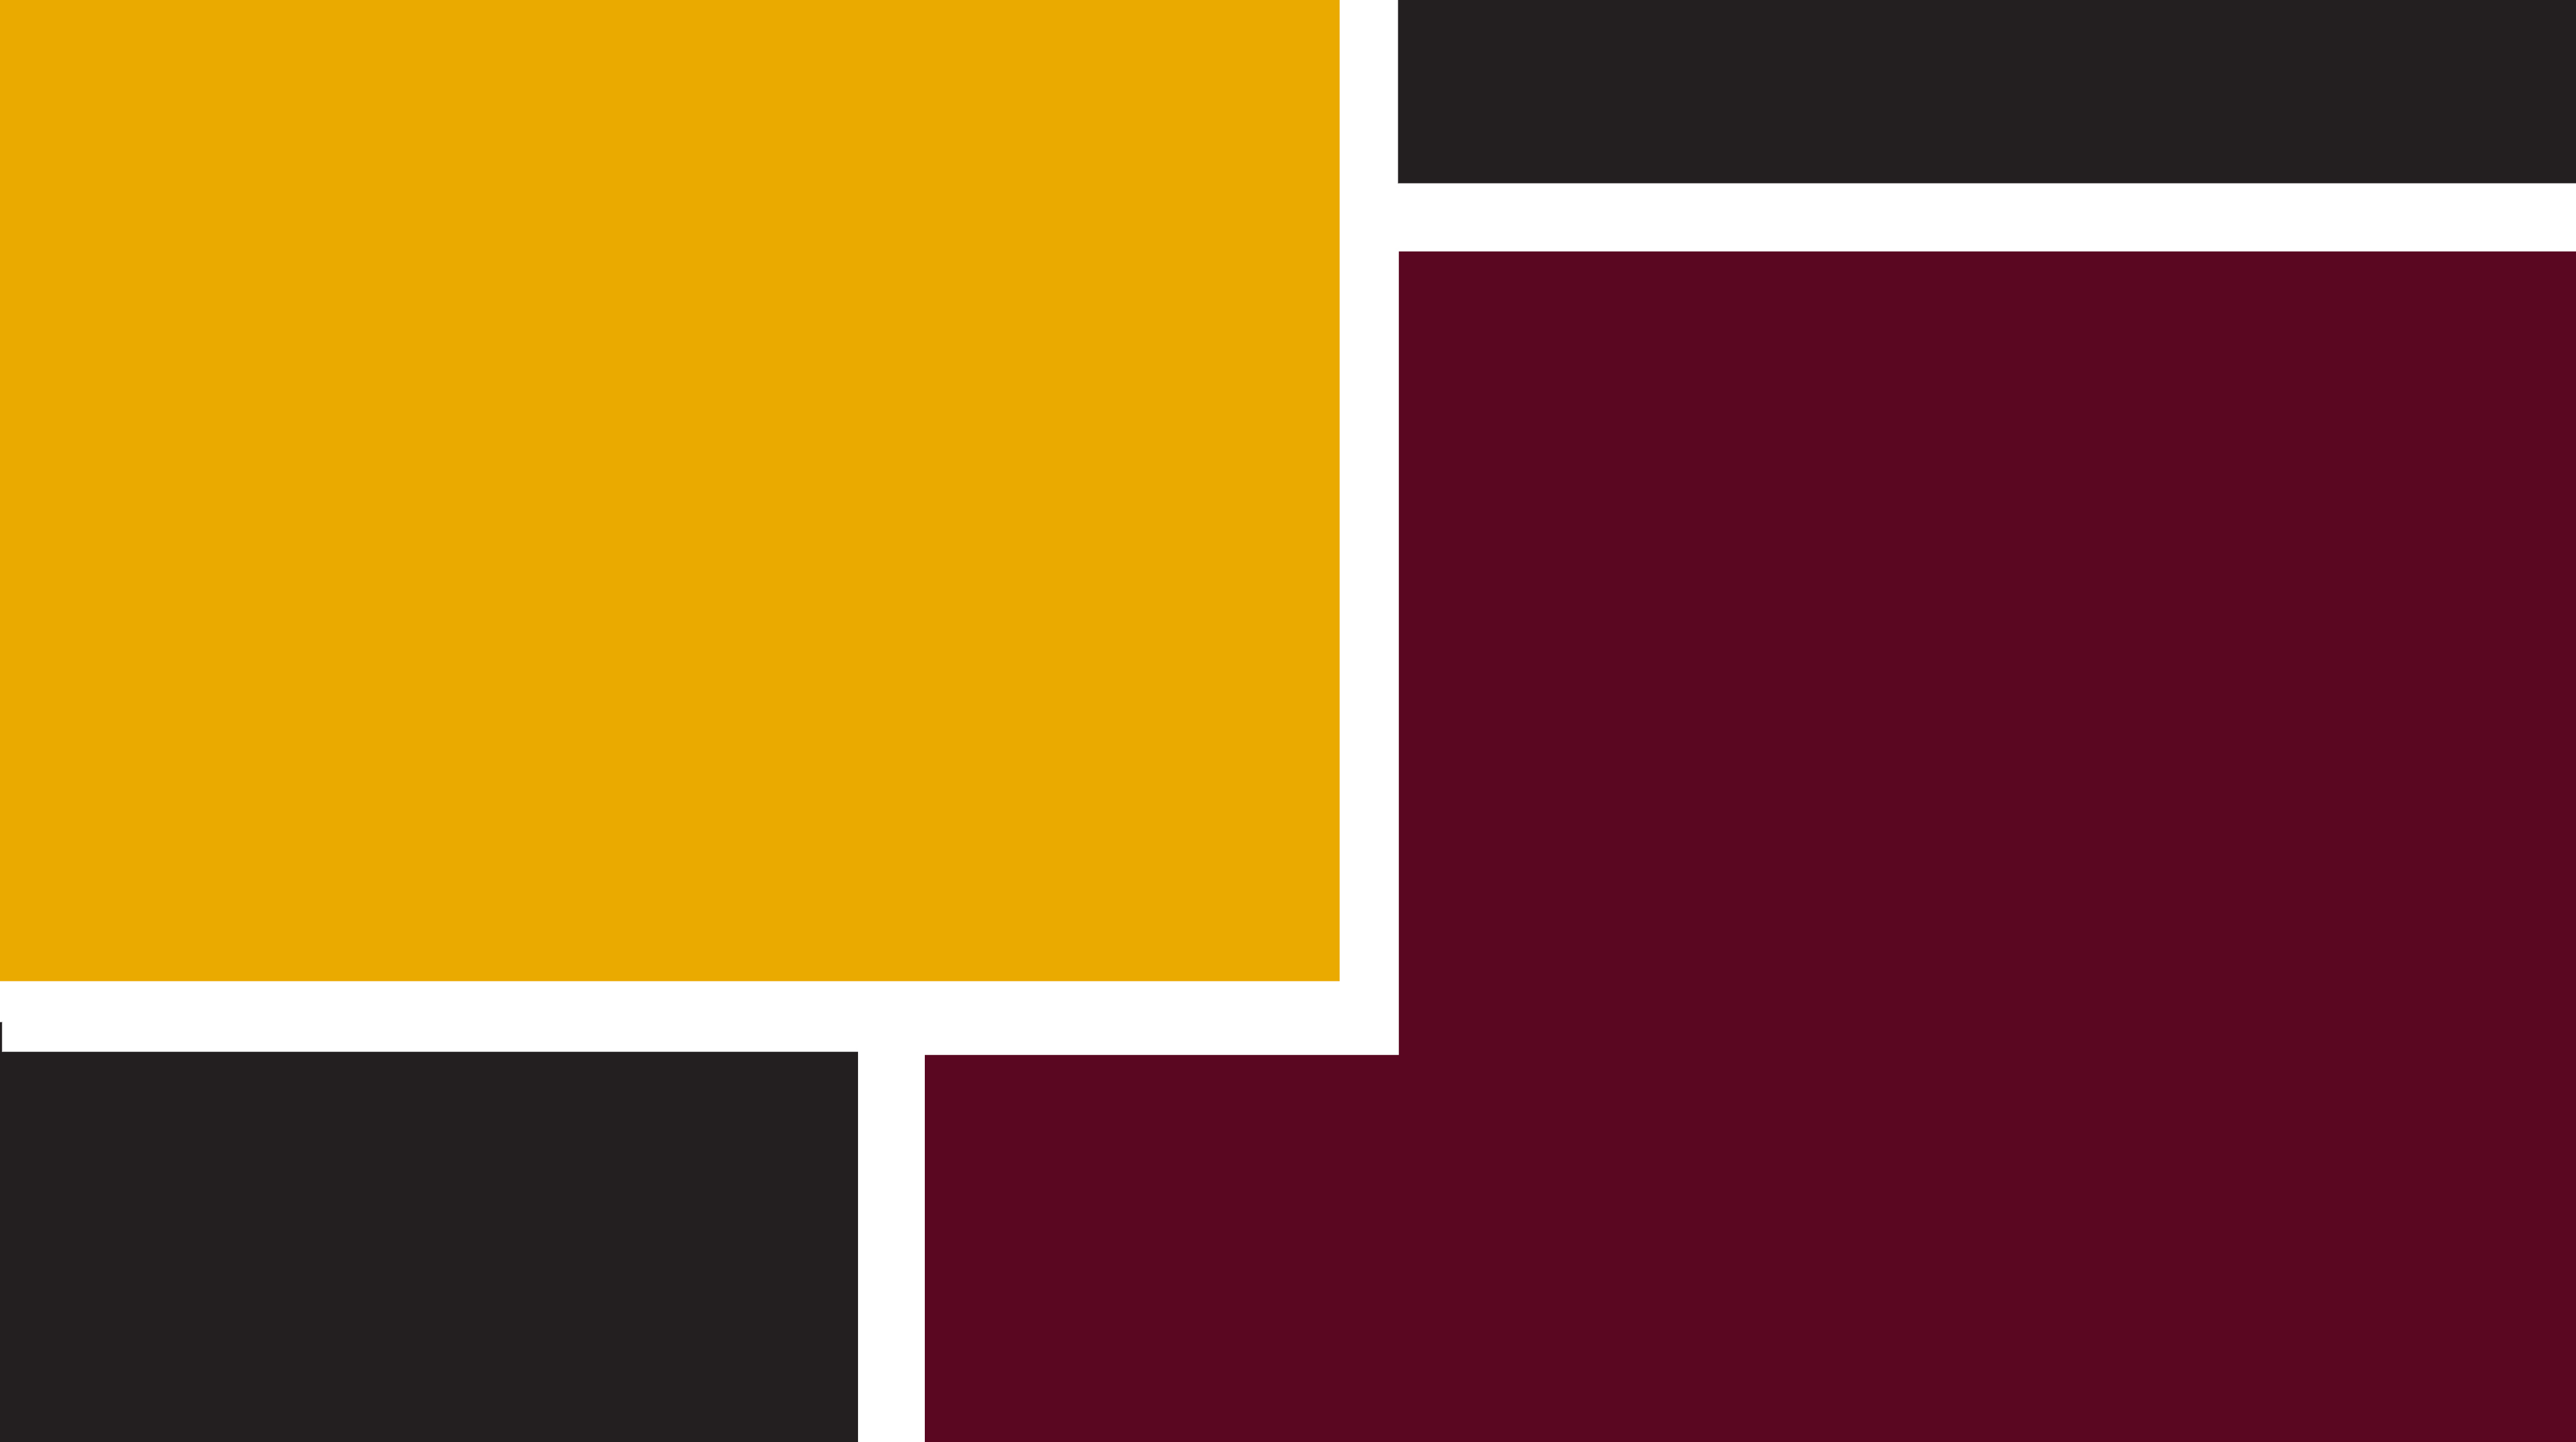 Graphic representation of the core Loyola University Chicago brand colors of maroon and gold.